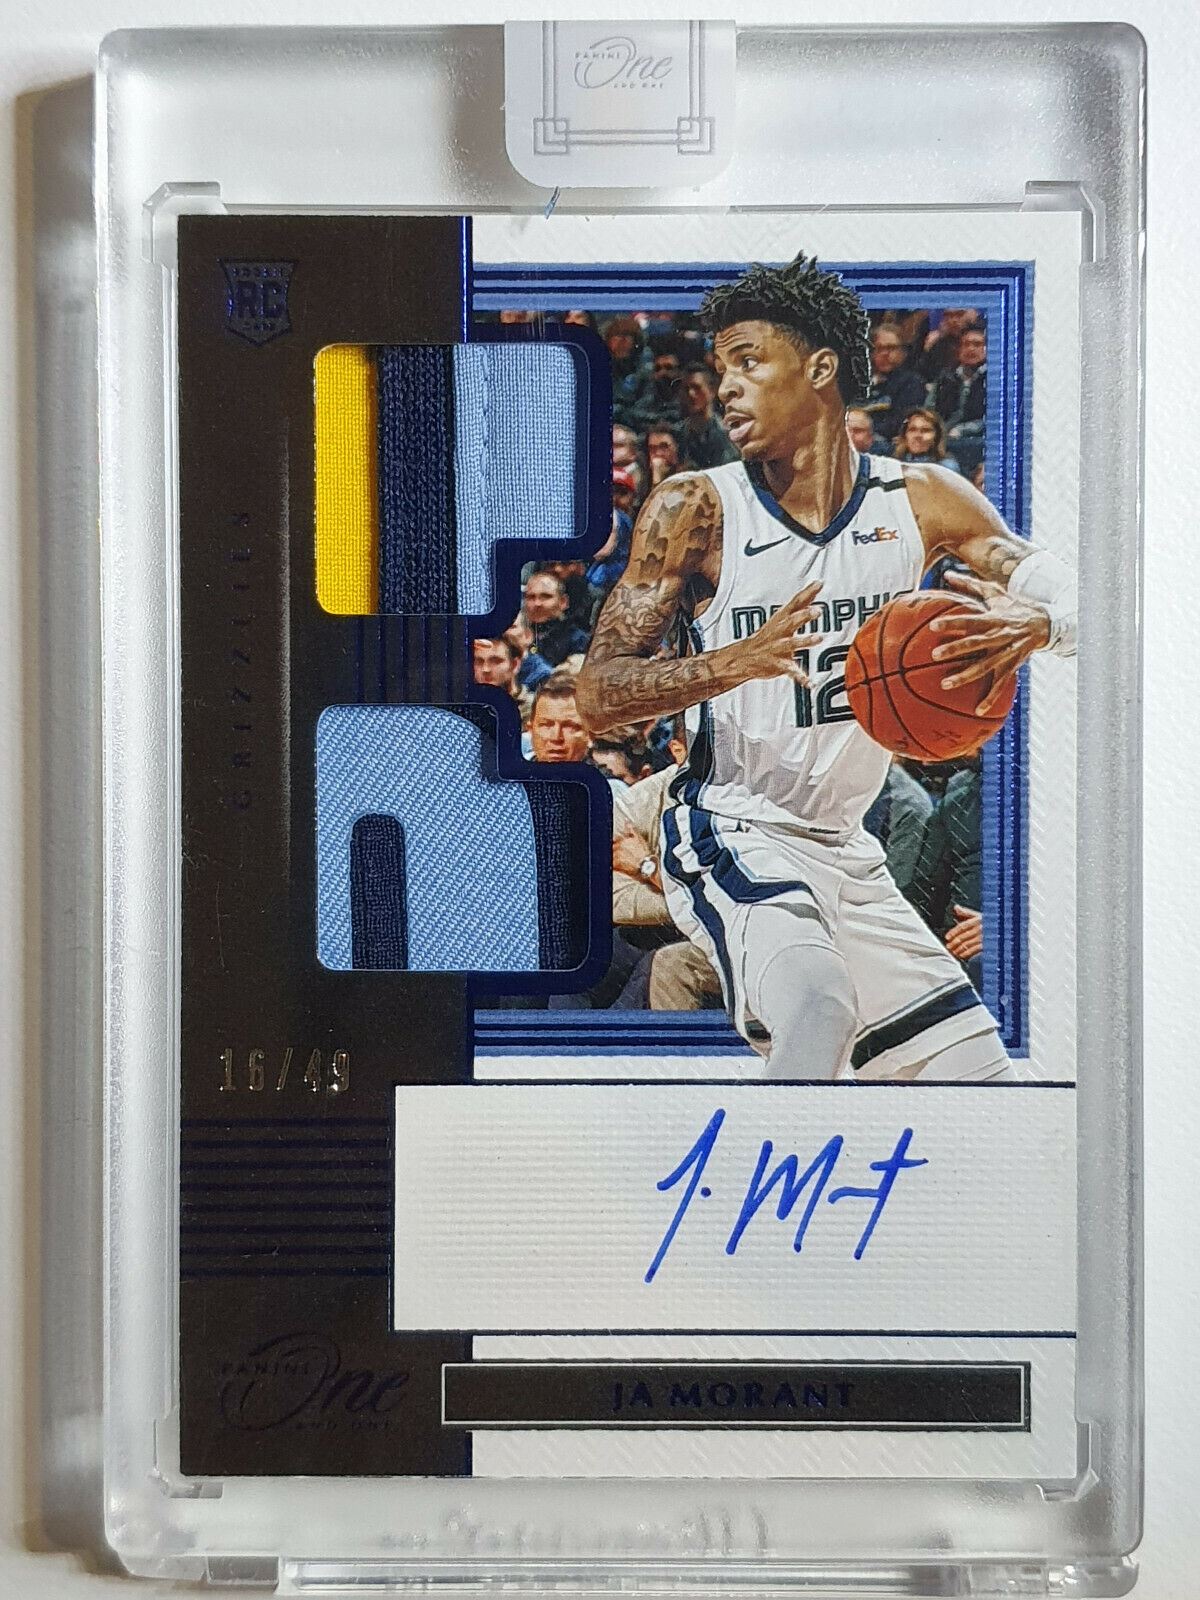 2019 One and One Ja Morant Rookie Patch Auto (RPA) DUAL BLUE /49